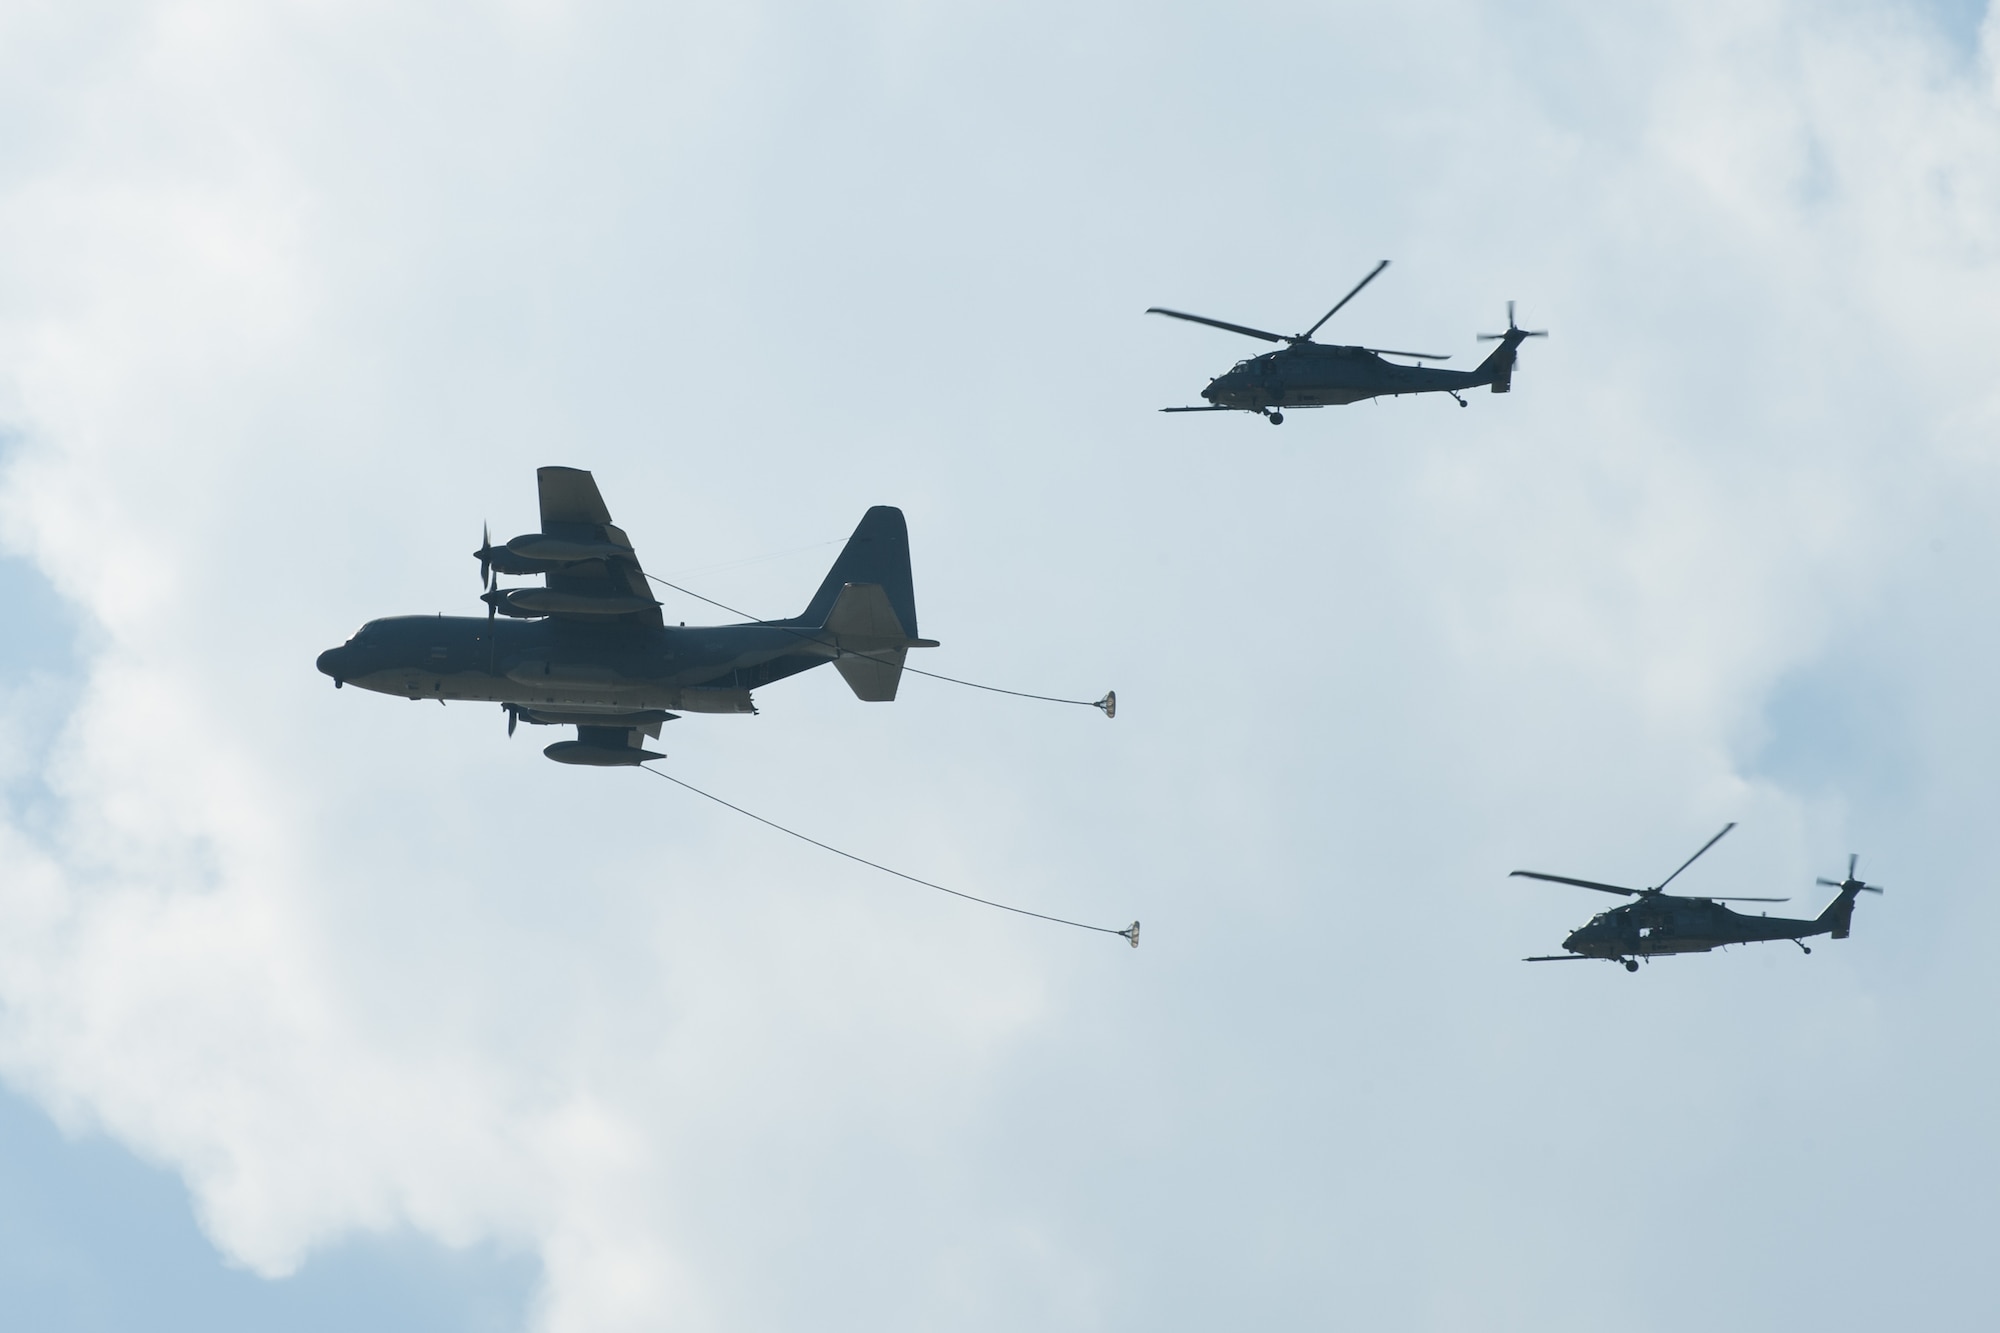 An HC-130P/N King crew flies in formation with the two HH-60 Pave Hawk helicopters to showcase its aerial refueling capabilities during an astronaut rescue demonstration at Patrick Air Force Base, Fla., March 14, 2016. The demonstration involved Air Force Guardian Angel Airmen and aircraft from the 920th Rescue Wing to showcase aspects of safe rescue operations. Airmen from Detachment 3 coordinate astronaut capsule rescue and recovery and train personnel worldwide to ensure the Department of Defense is ready to support NASA's human space endeavors. (U.S. Air Force photo by Benjamin Thacker/Released)